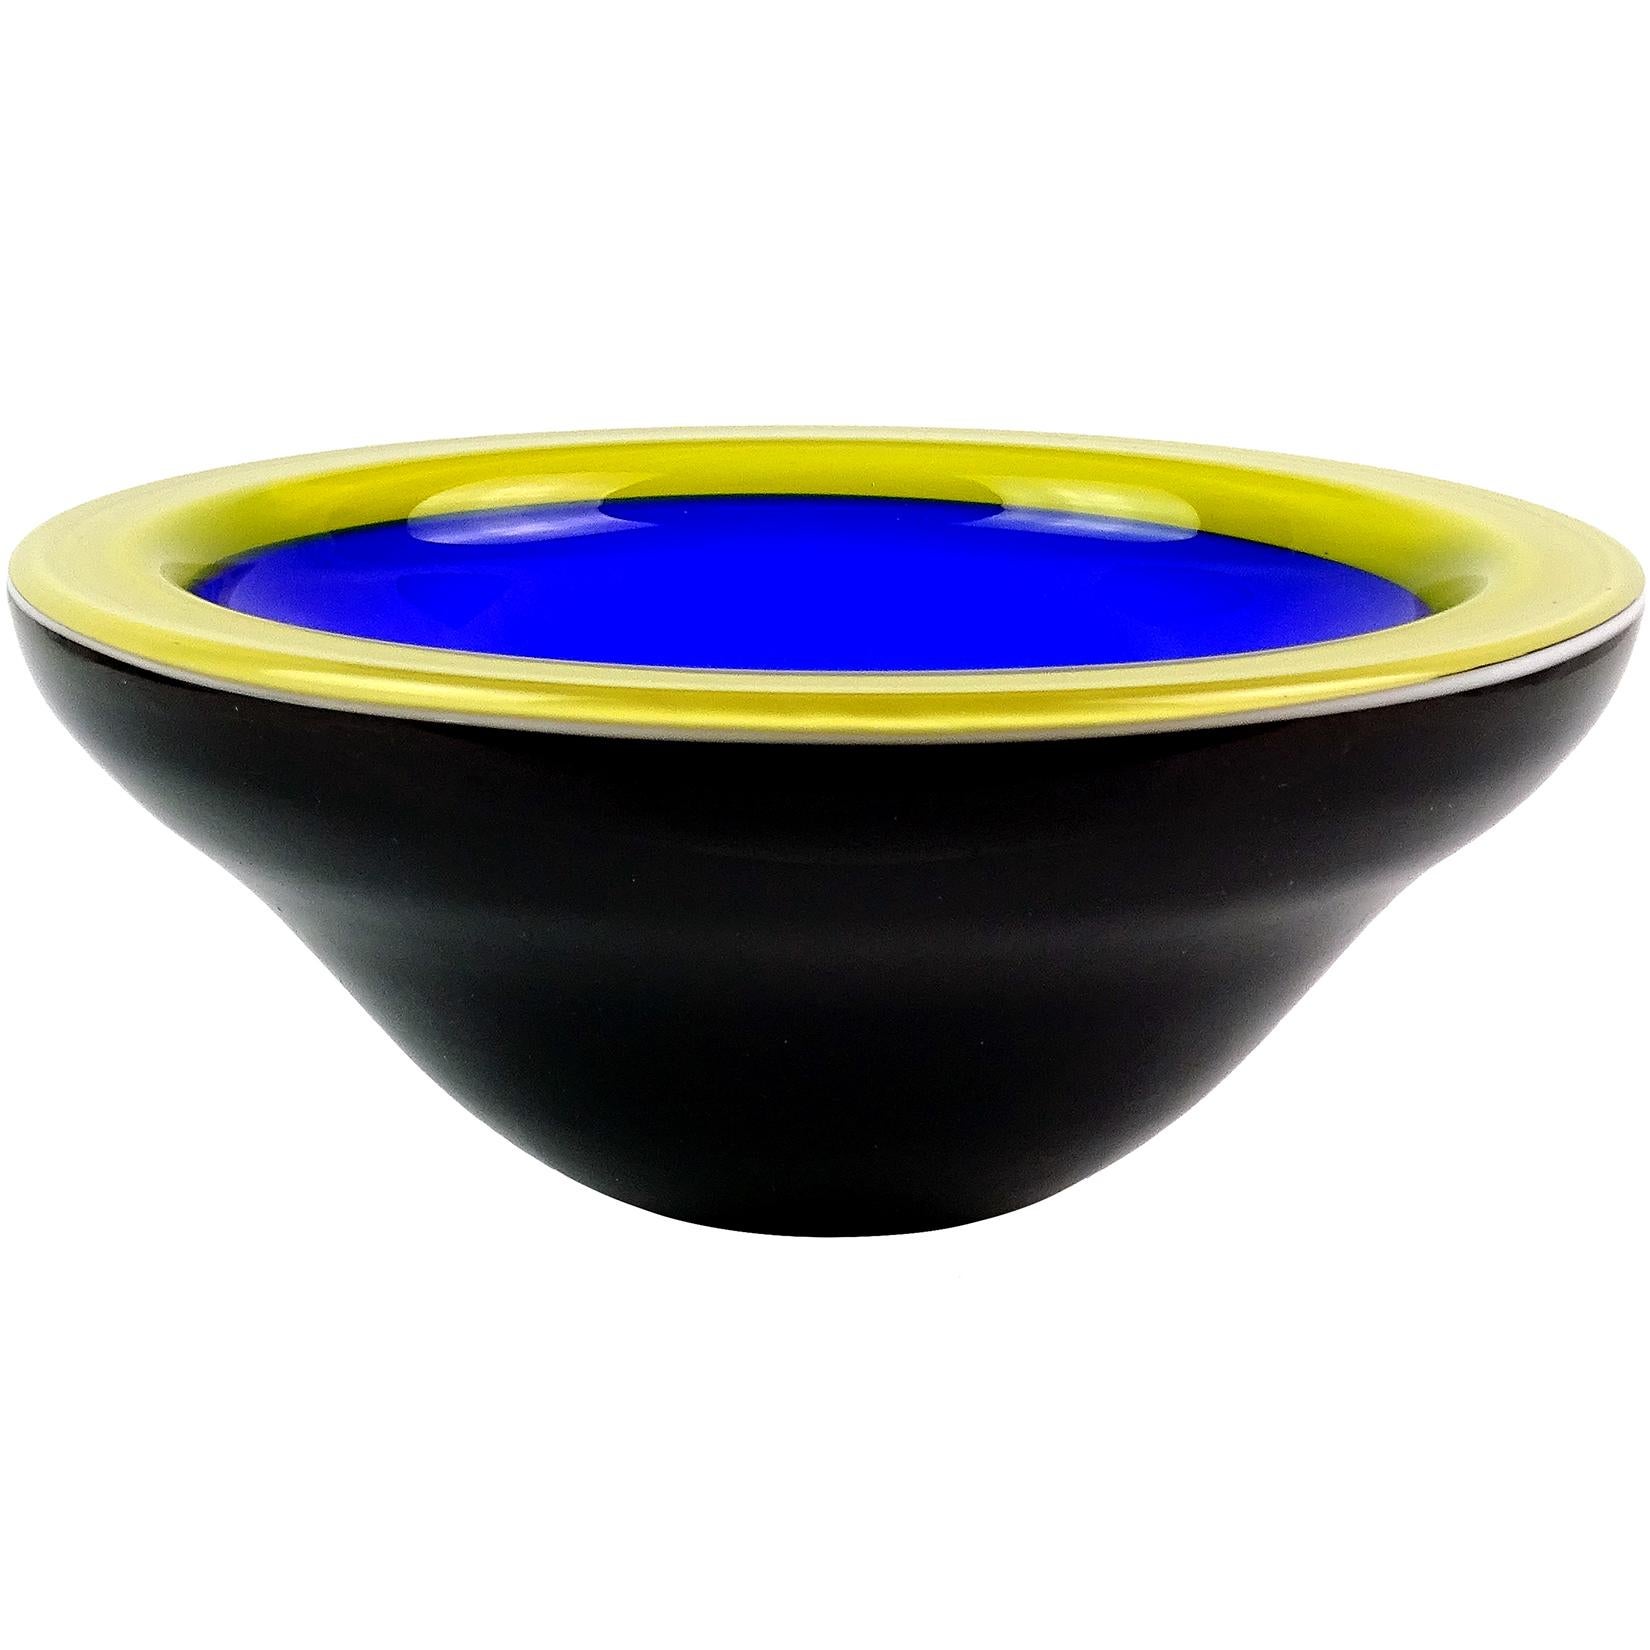 Beautiful vintage ICET Arte Murano hand blown rich cobalt blue, yellow and black art glass bowl. Signed underneath. Made in Venezuela, but crated in the manner of the Italian Murano workshops. The bowl is very deep, with a gorgeous contrasting color